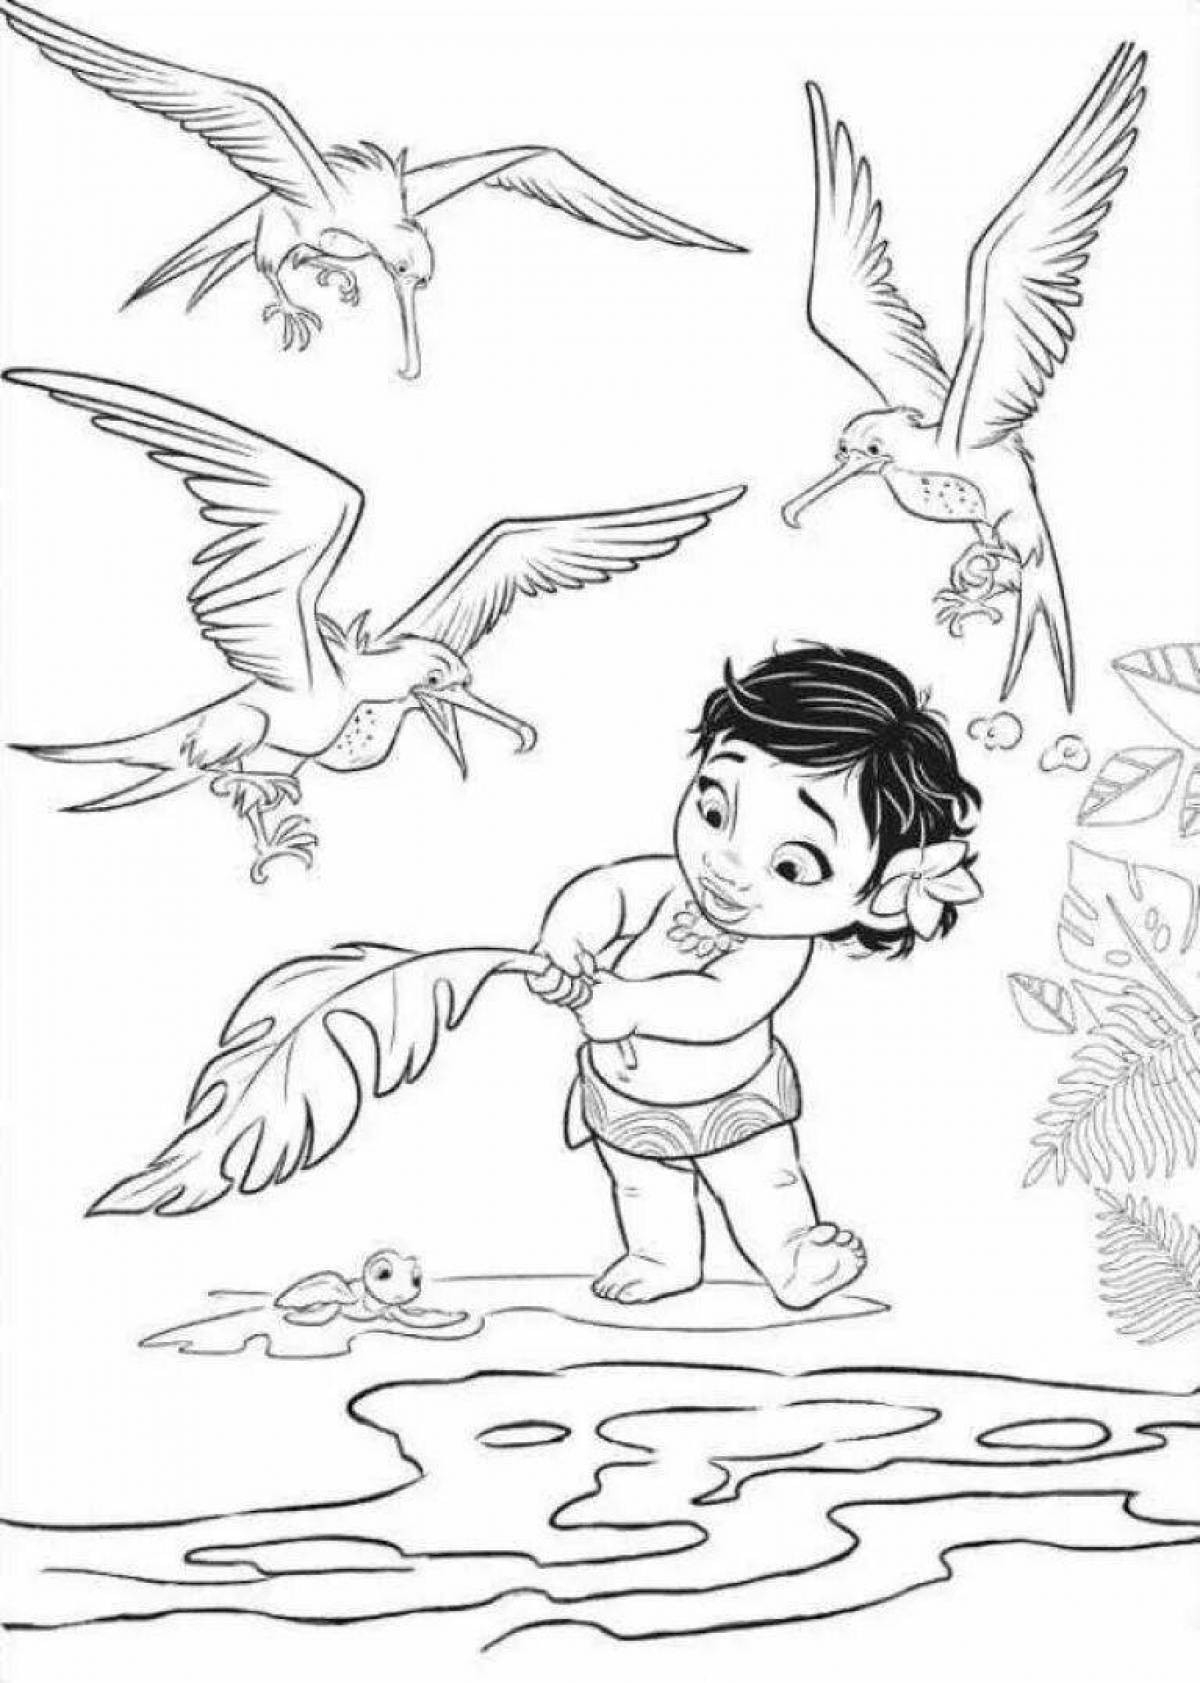 Inspirational moana coloring book for kids